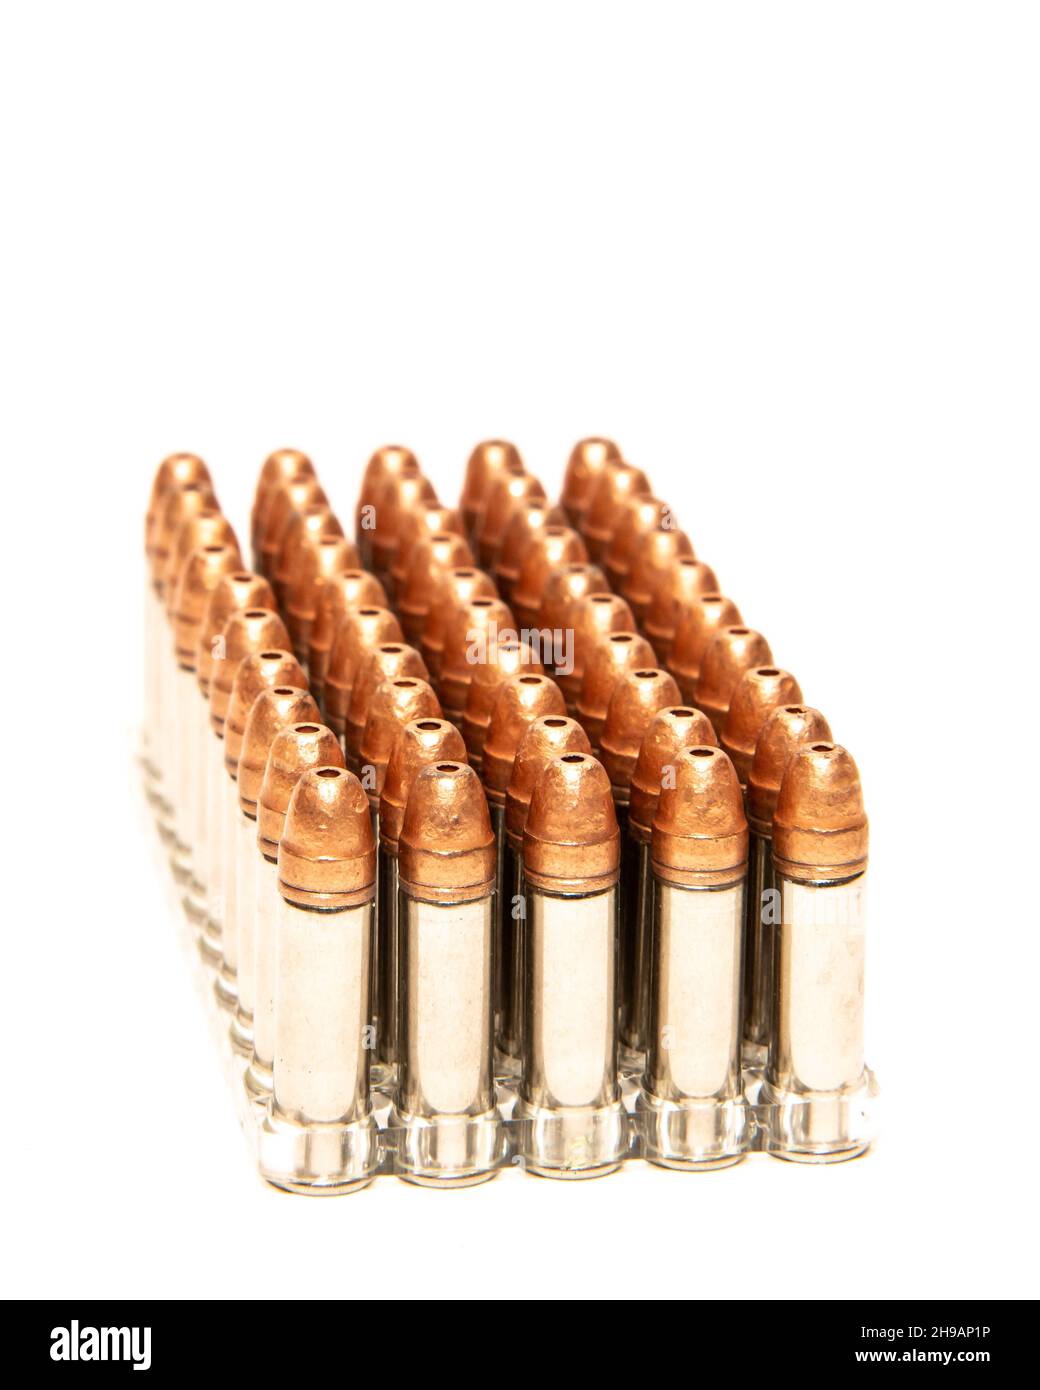 Image of a plastic tray of CCI Stinger .22 LR copper plated hollow point cartridges isolated on white Stock Photo